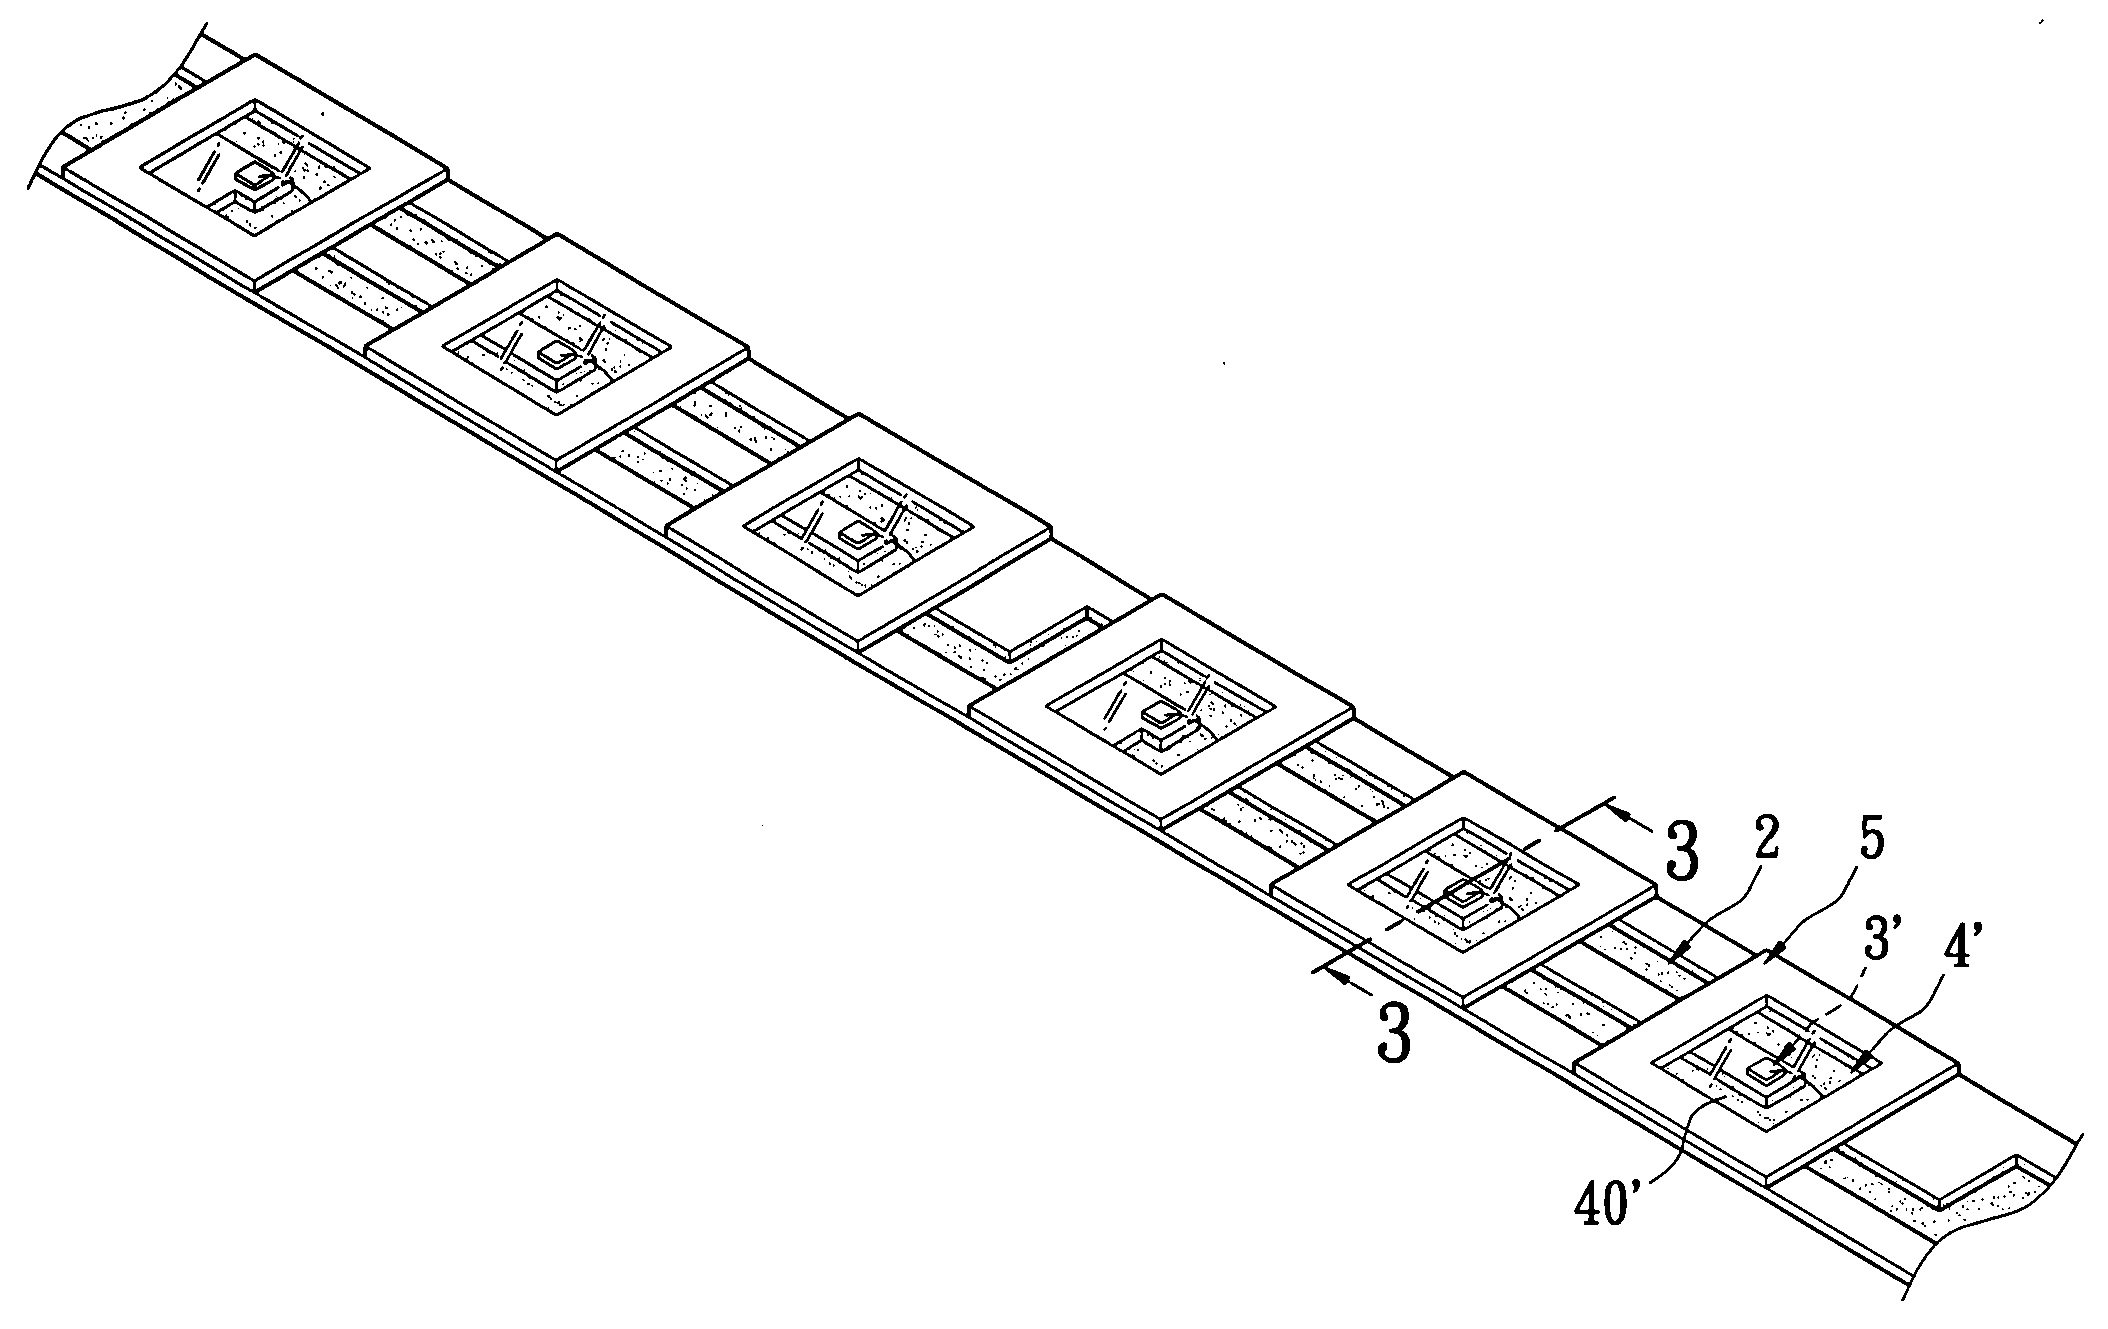 LED chip package structure with a high-efficiency heat-dissipating substrate and method for making the same